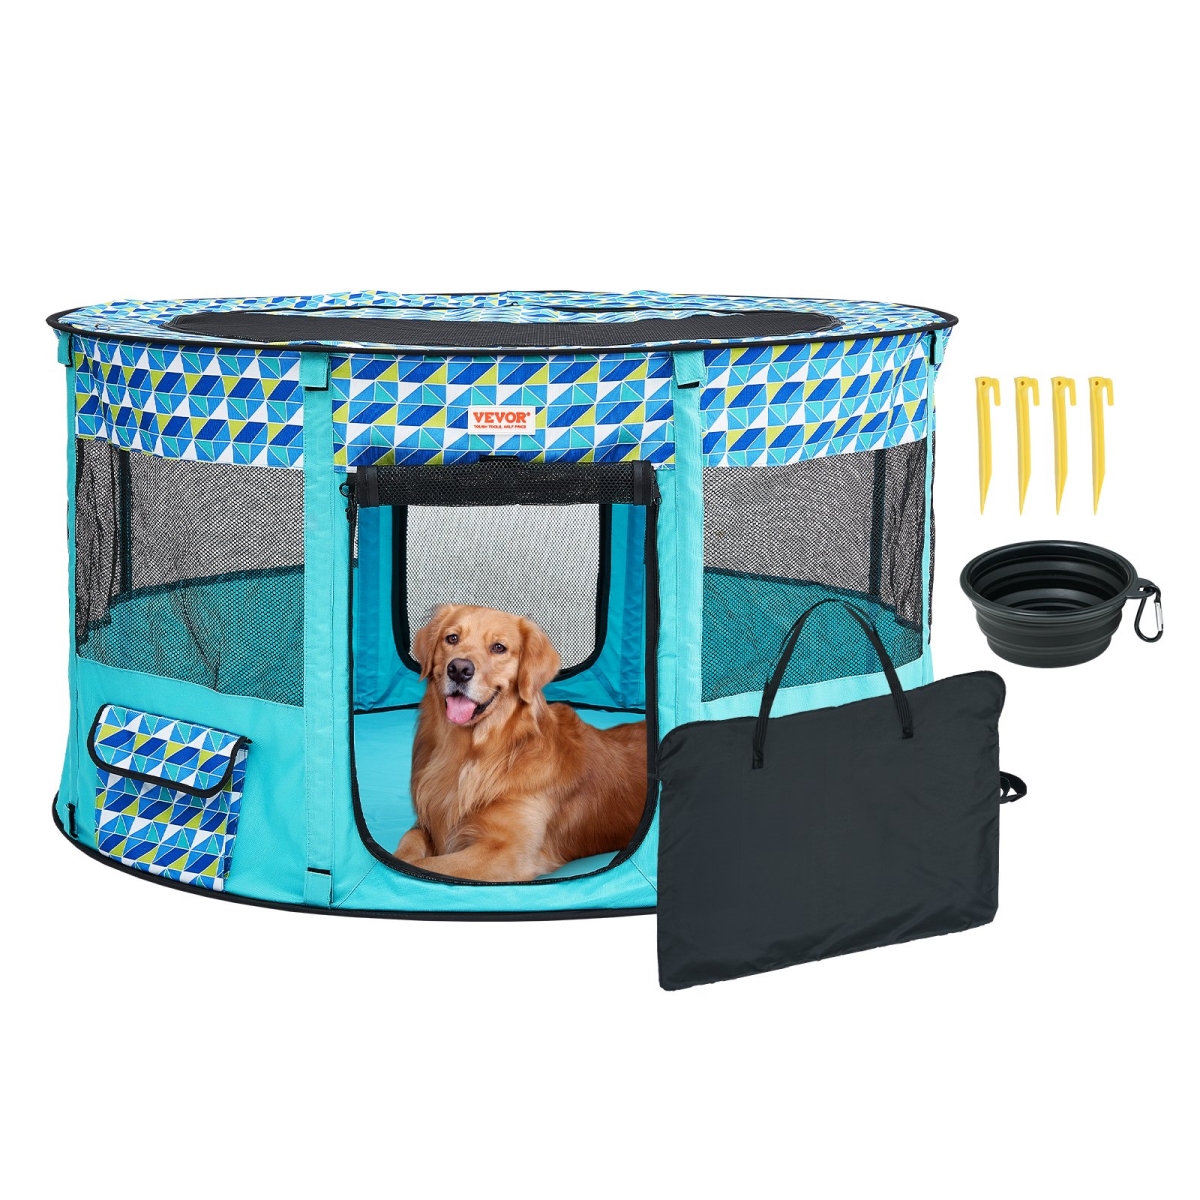 Picture of Vevor BLKZDCWWL44I3K09LV0 44 x 44 x 24 in. Portable Pet Carrying Playpen 600D Oxford Cloth Dogs Crates Kennel with Removable Zipper